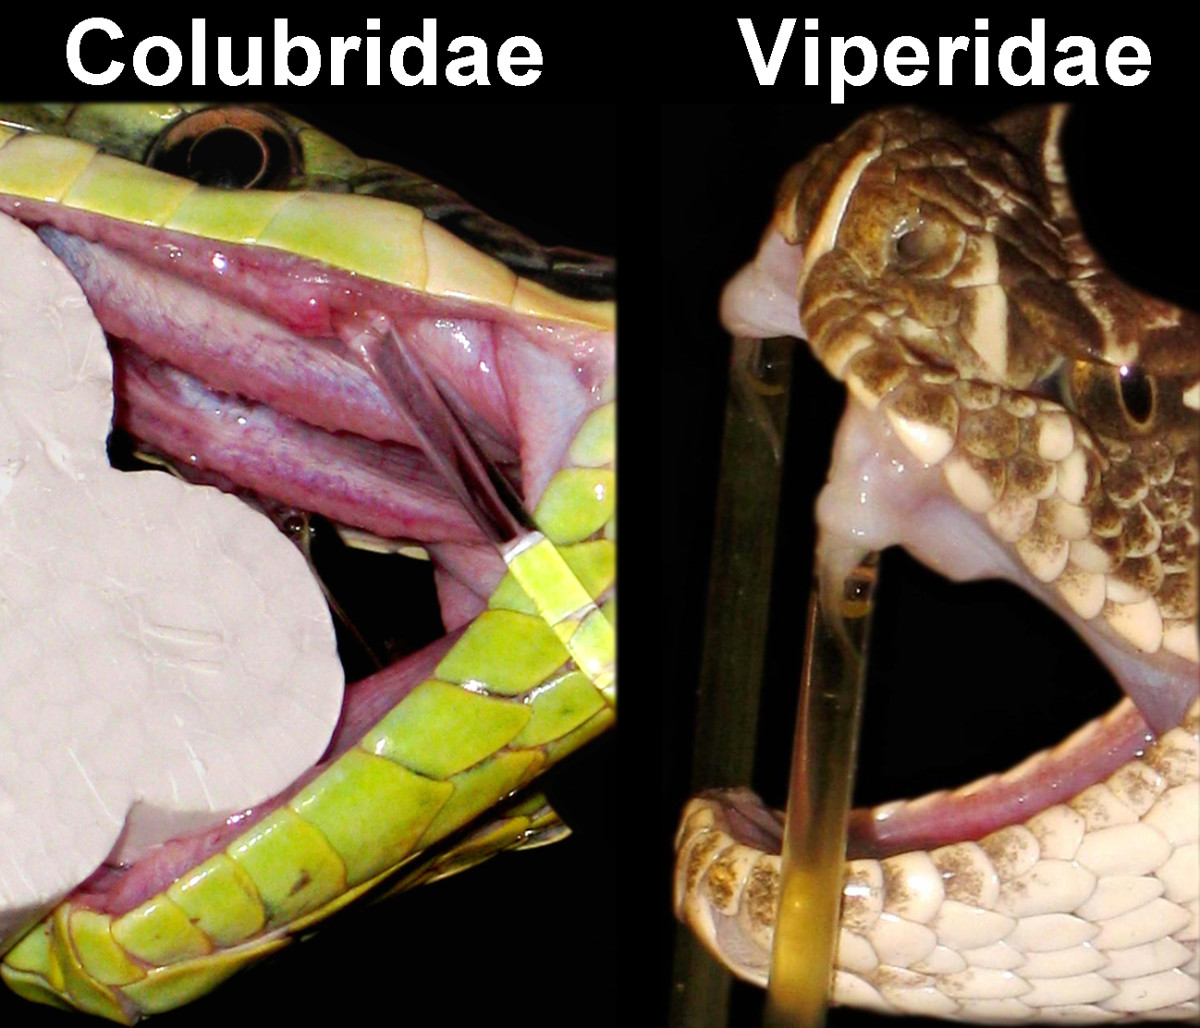 Snake Venom Composition and Variability